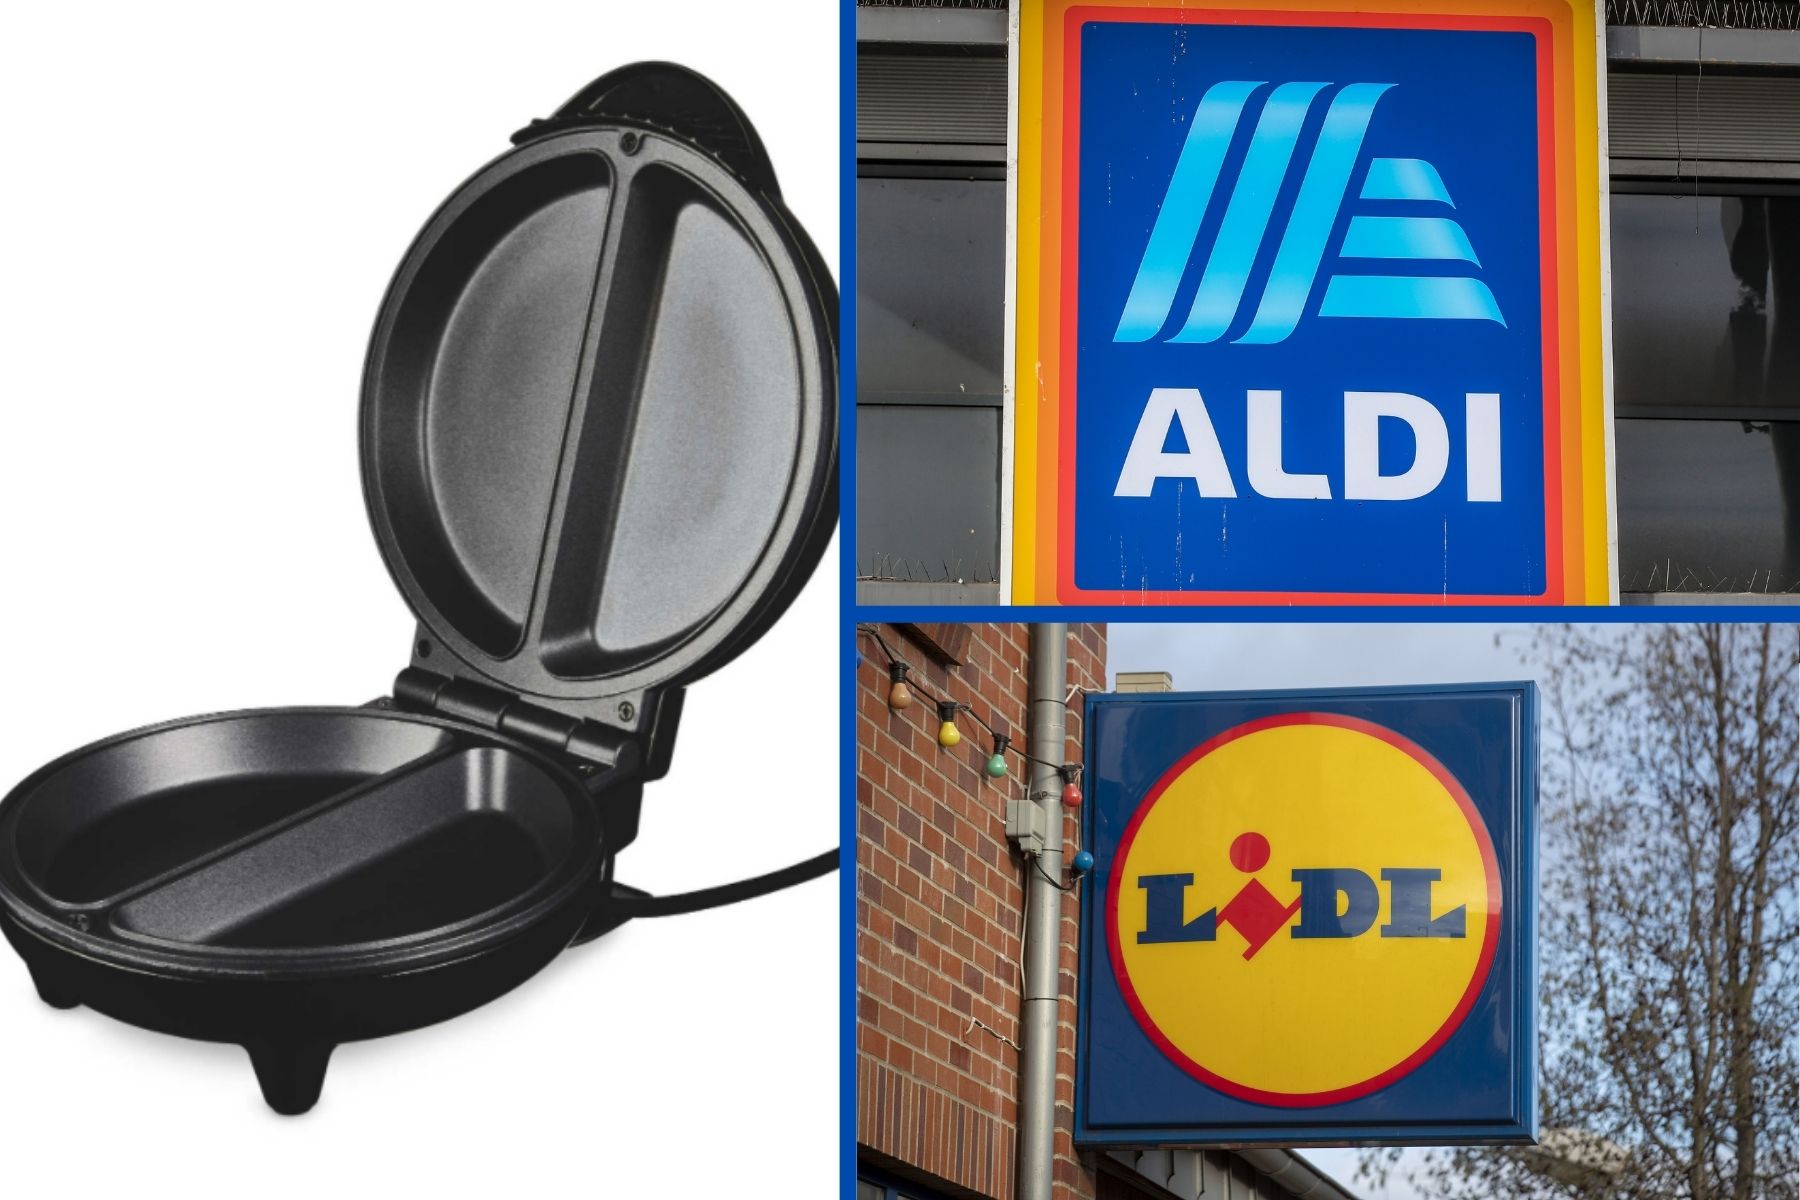 What’s in the middle of Lidl and Aldi this week from Sunday January 9th?